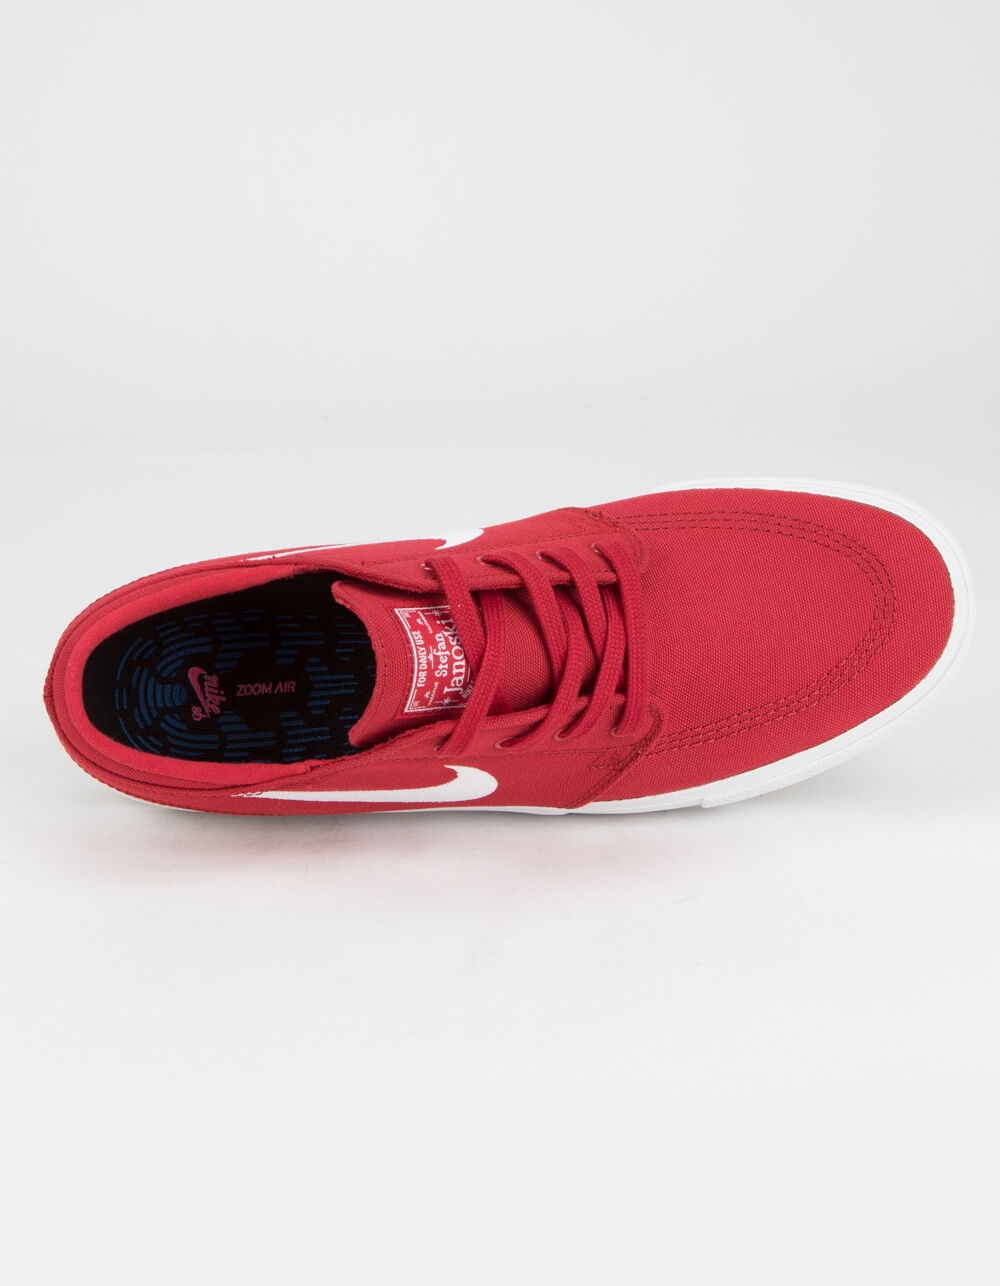 NIKE SB Stefan Janoski Canvas RM Red Shoes - RED Tillys